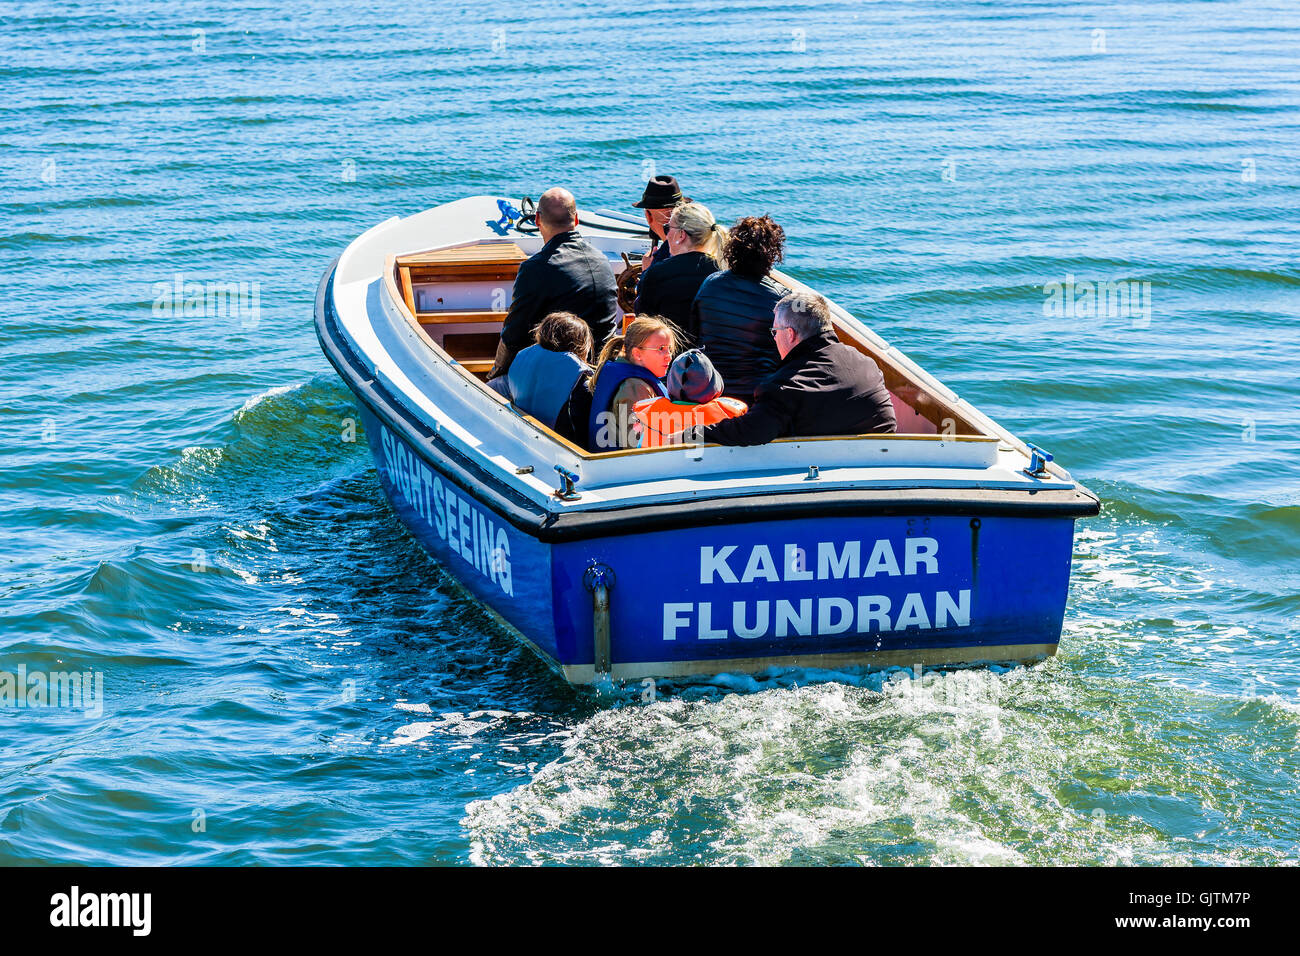 Kalmar, Sweden - August 10, 2016: Tourists on the sightseeing boat Kalmar Flundran as seen from behind and above. Stock Photo